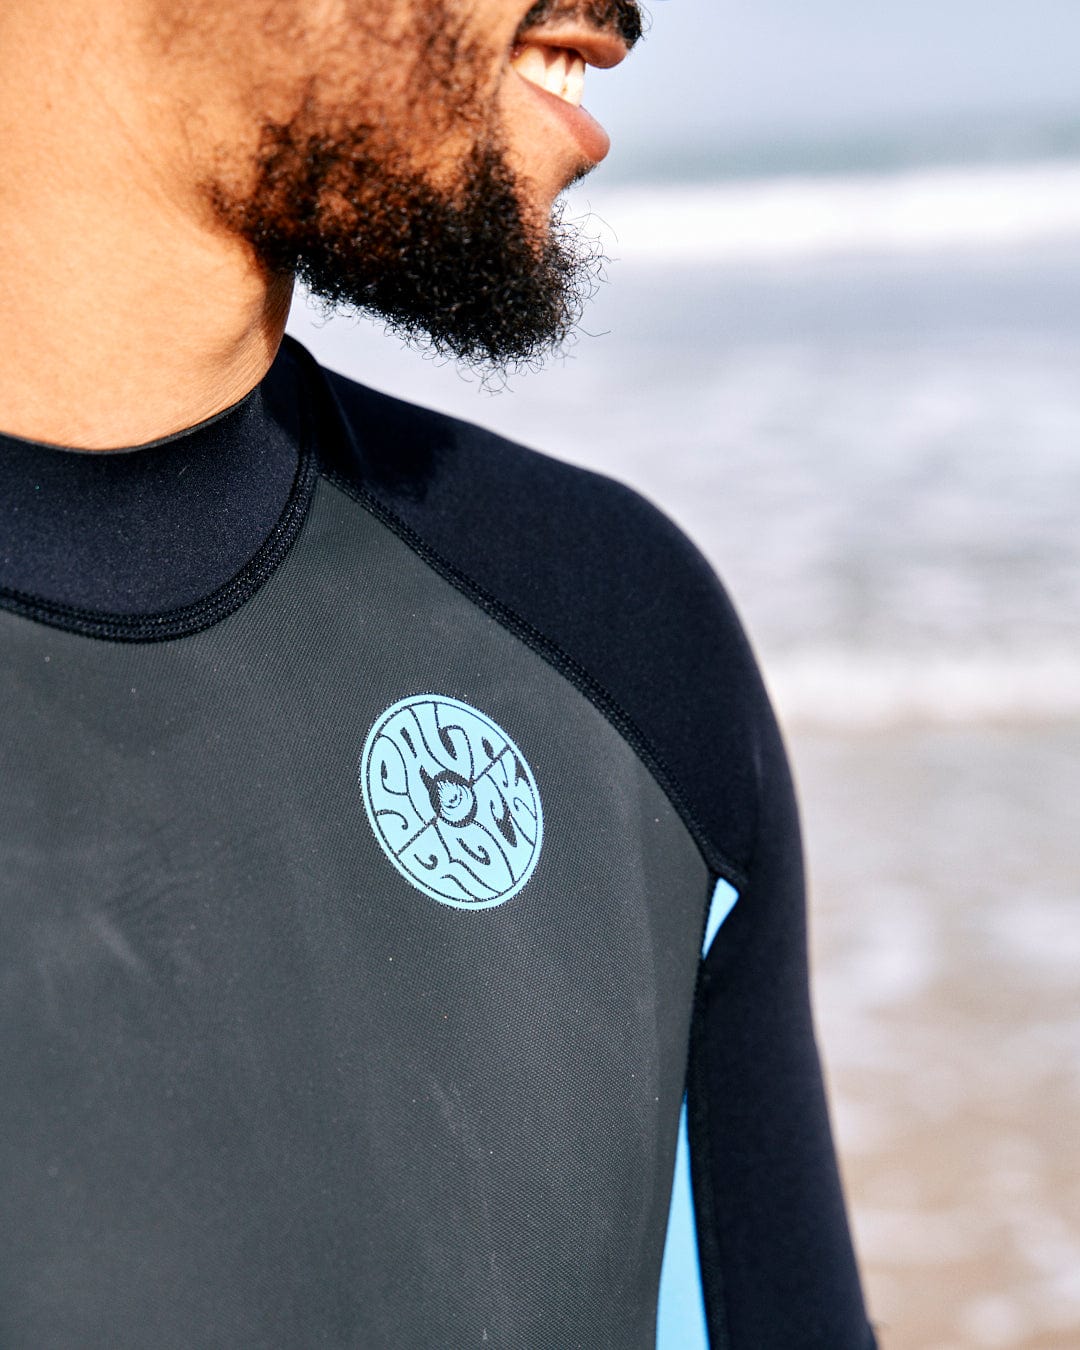 Close-up side view of a man with a beard wearing a Saltrock neoprene wetsuit with a circular logo on the chest, standing by the sea.